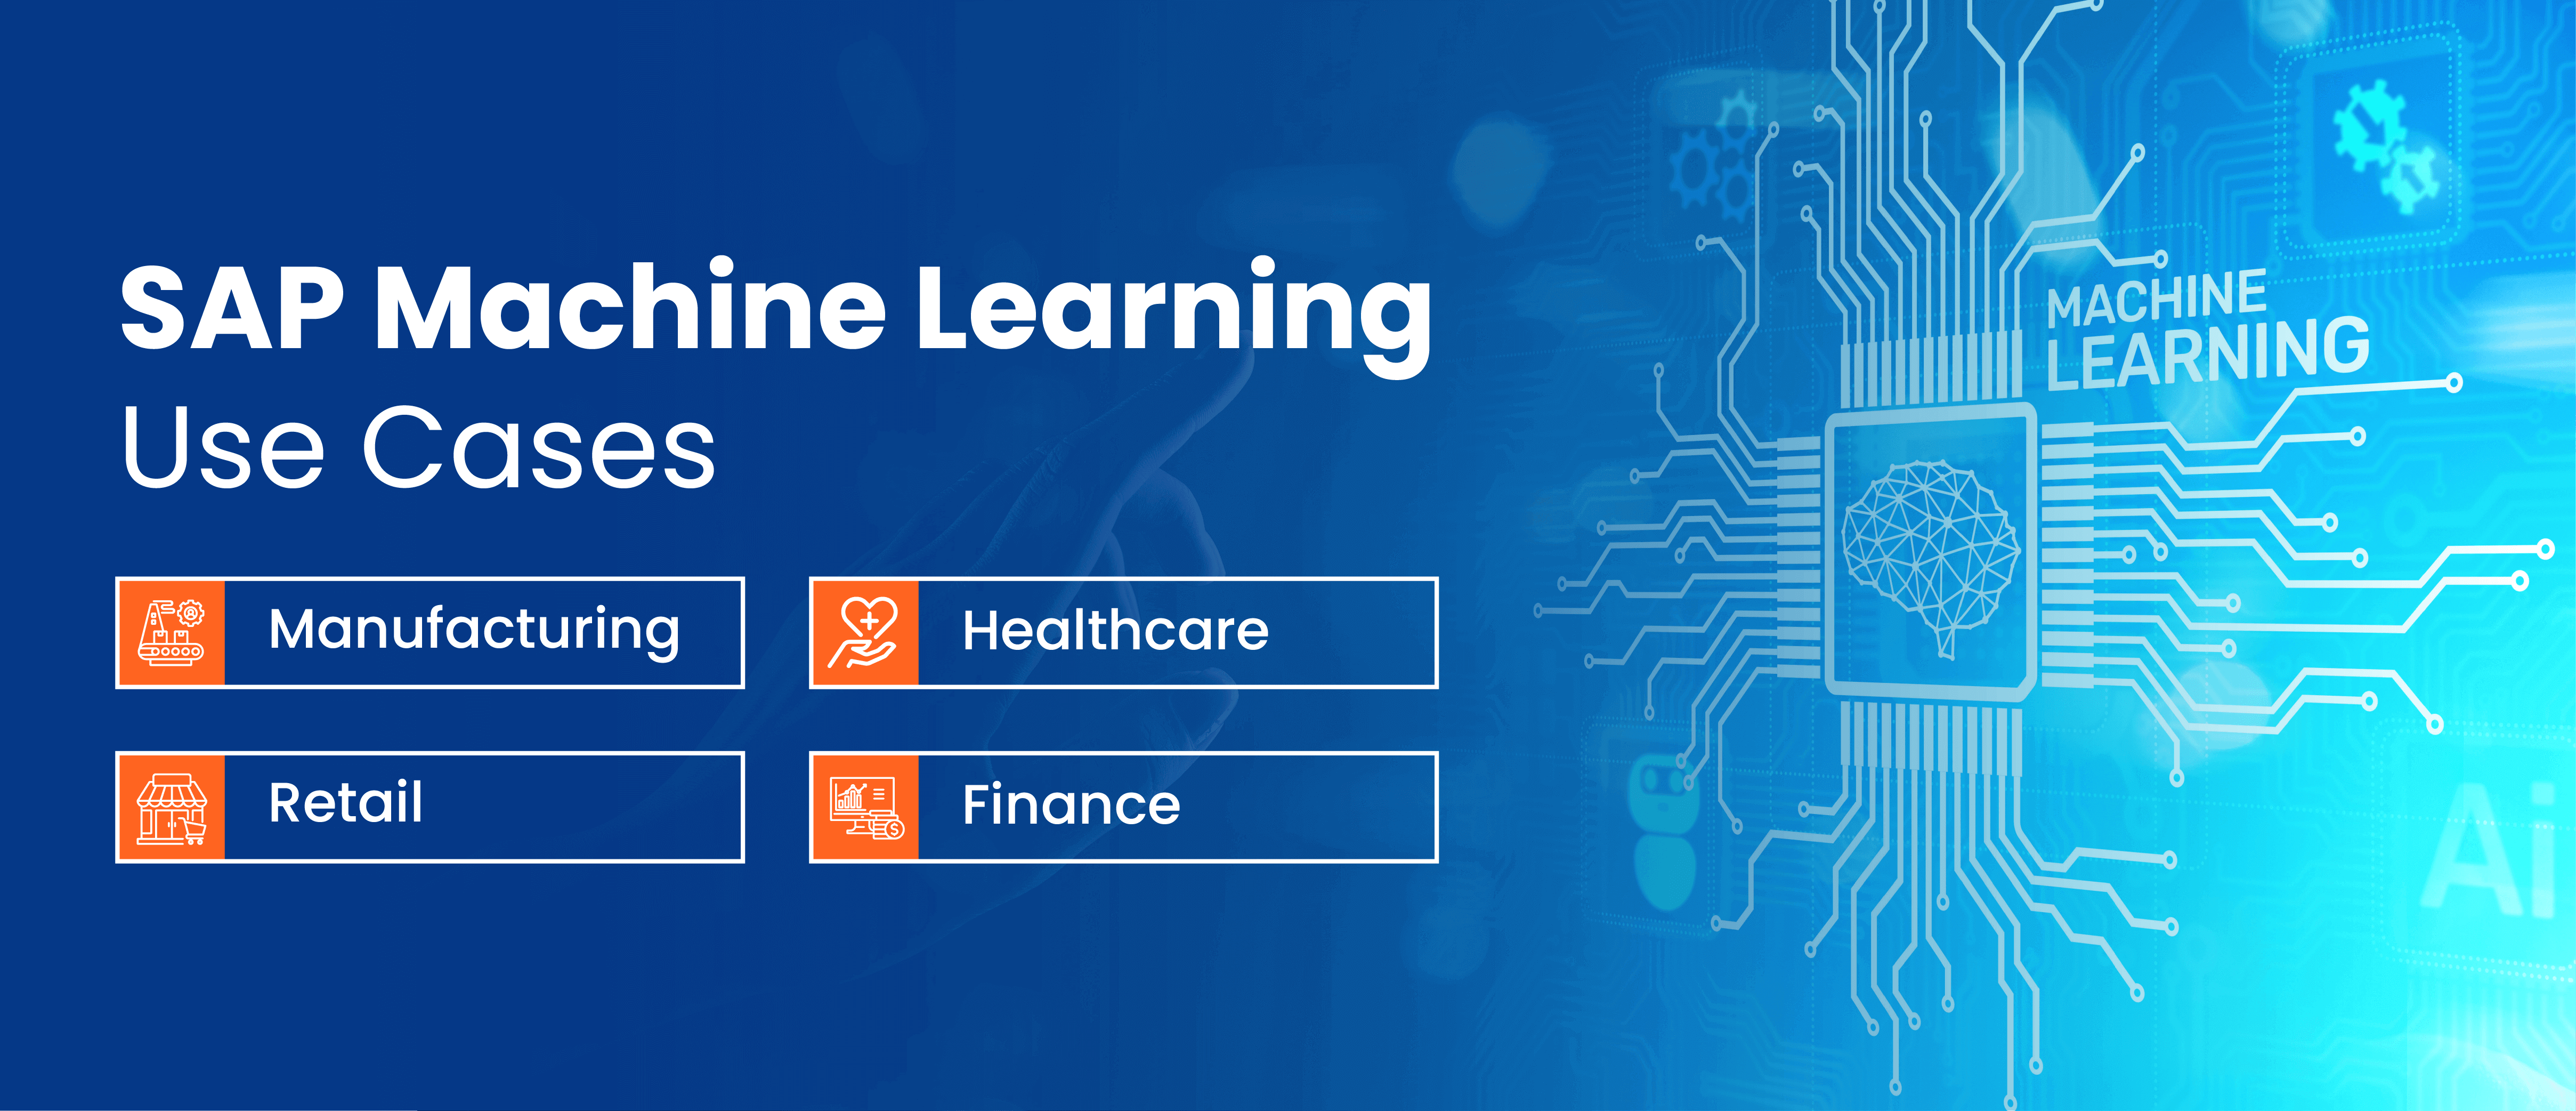 SAP Machine Learning Use Cases